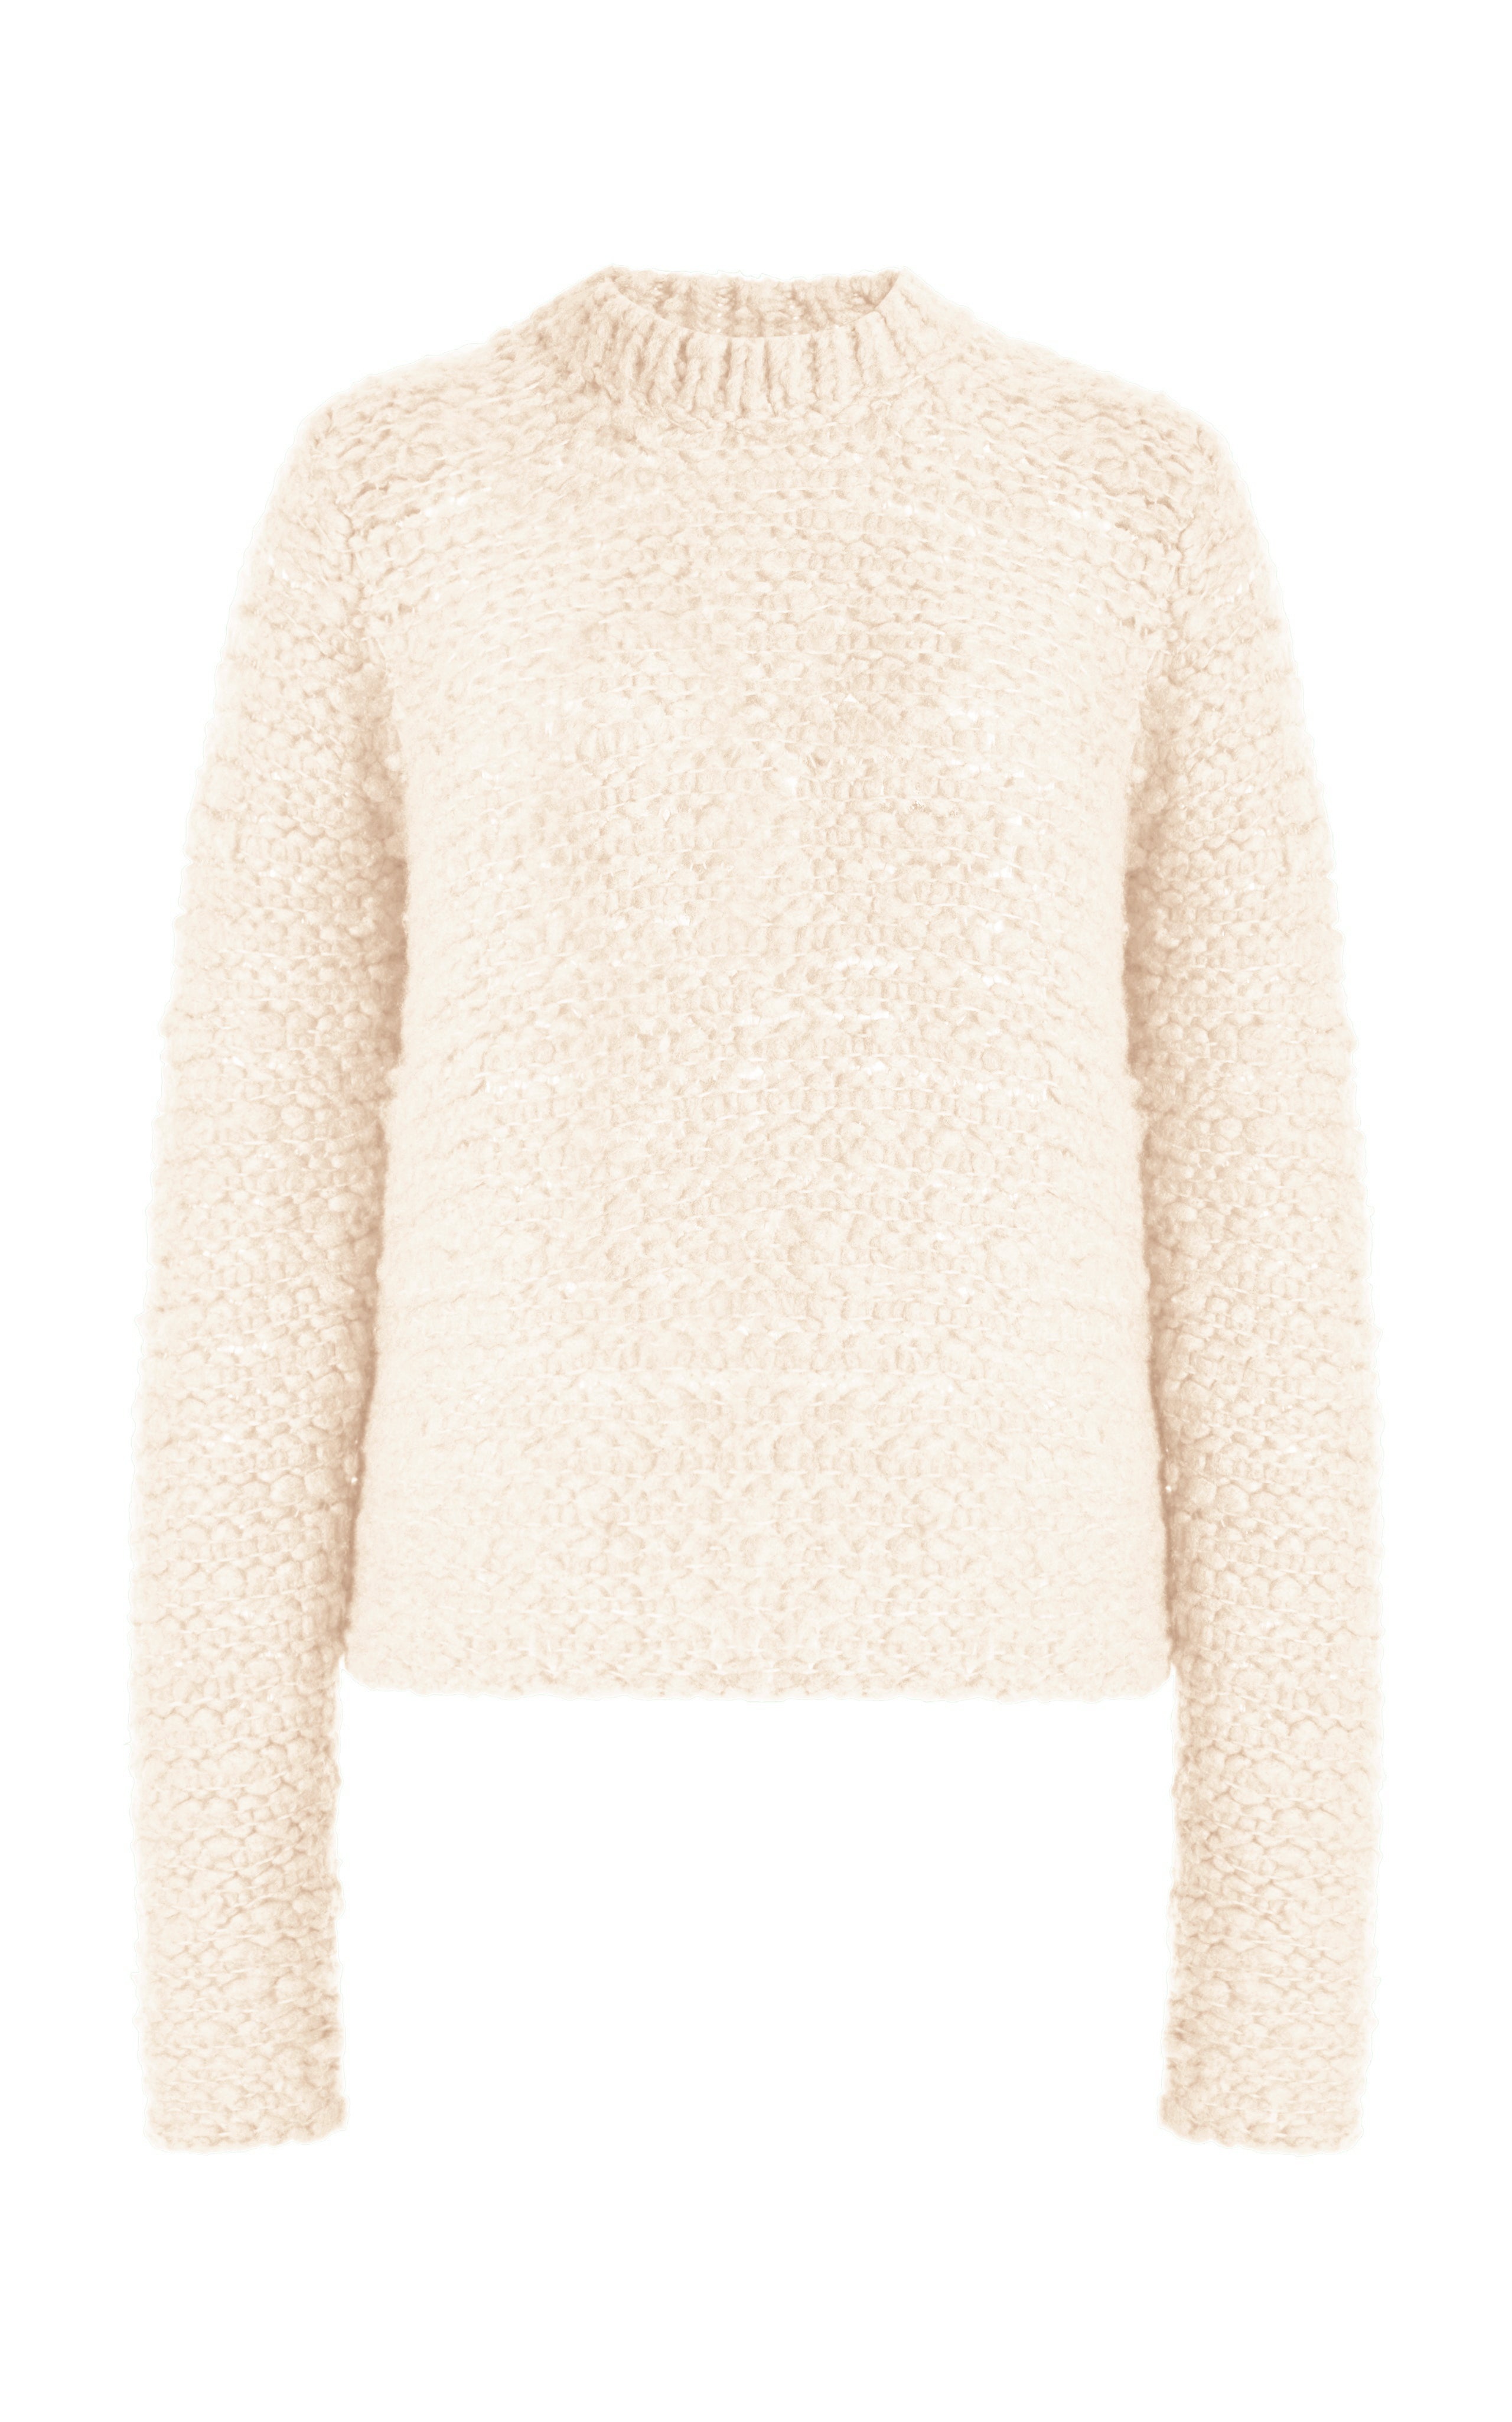 Durand Knit Sweater in Ivory Welfat Cashmere - 1